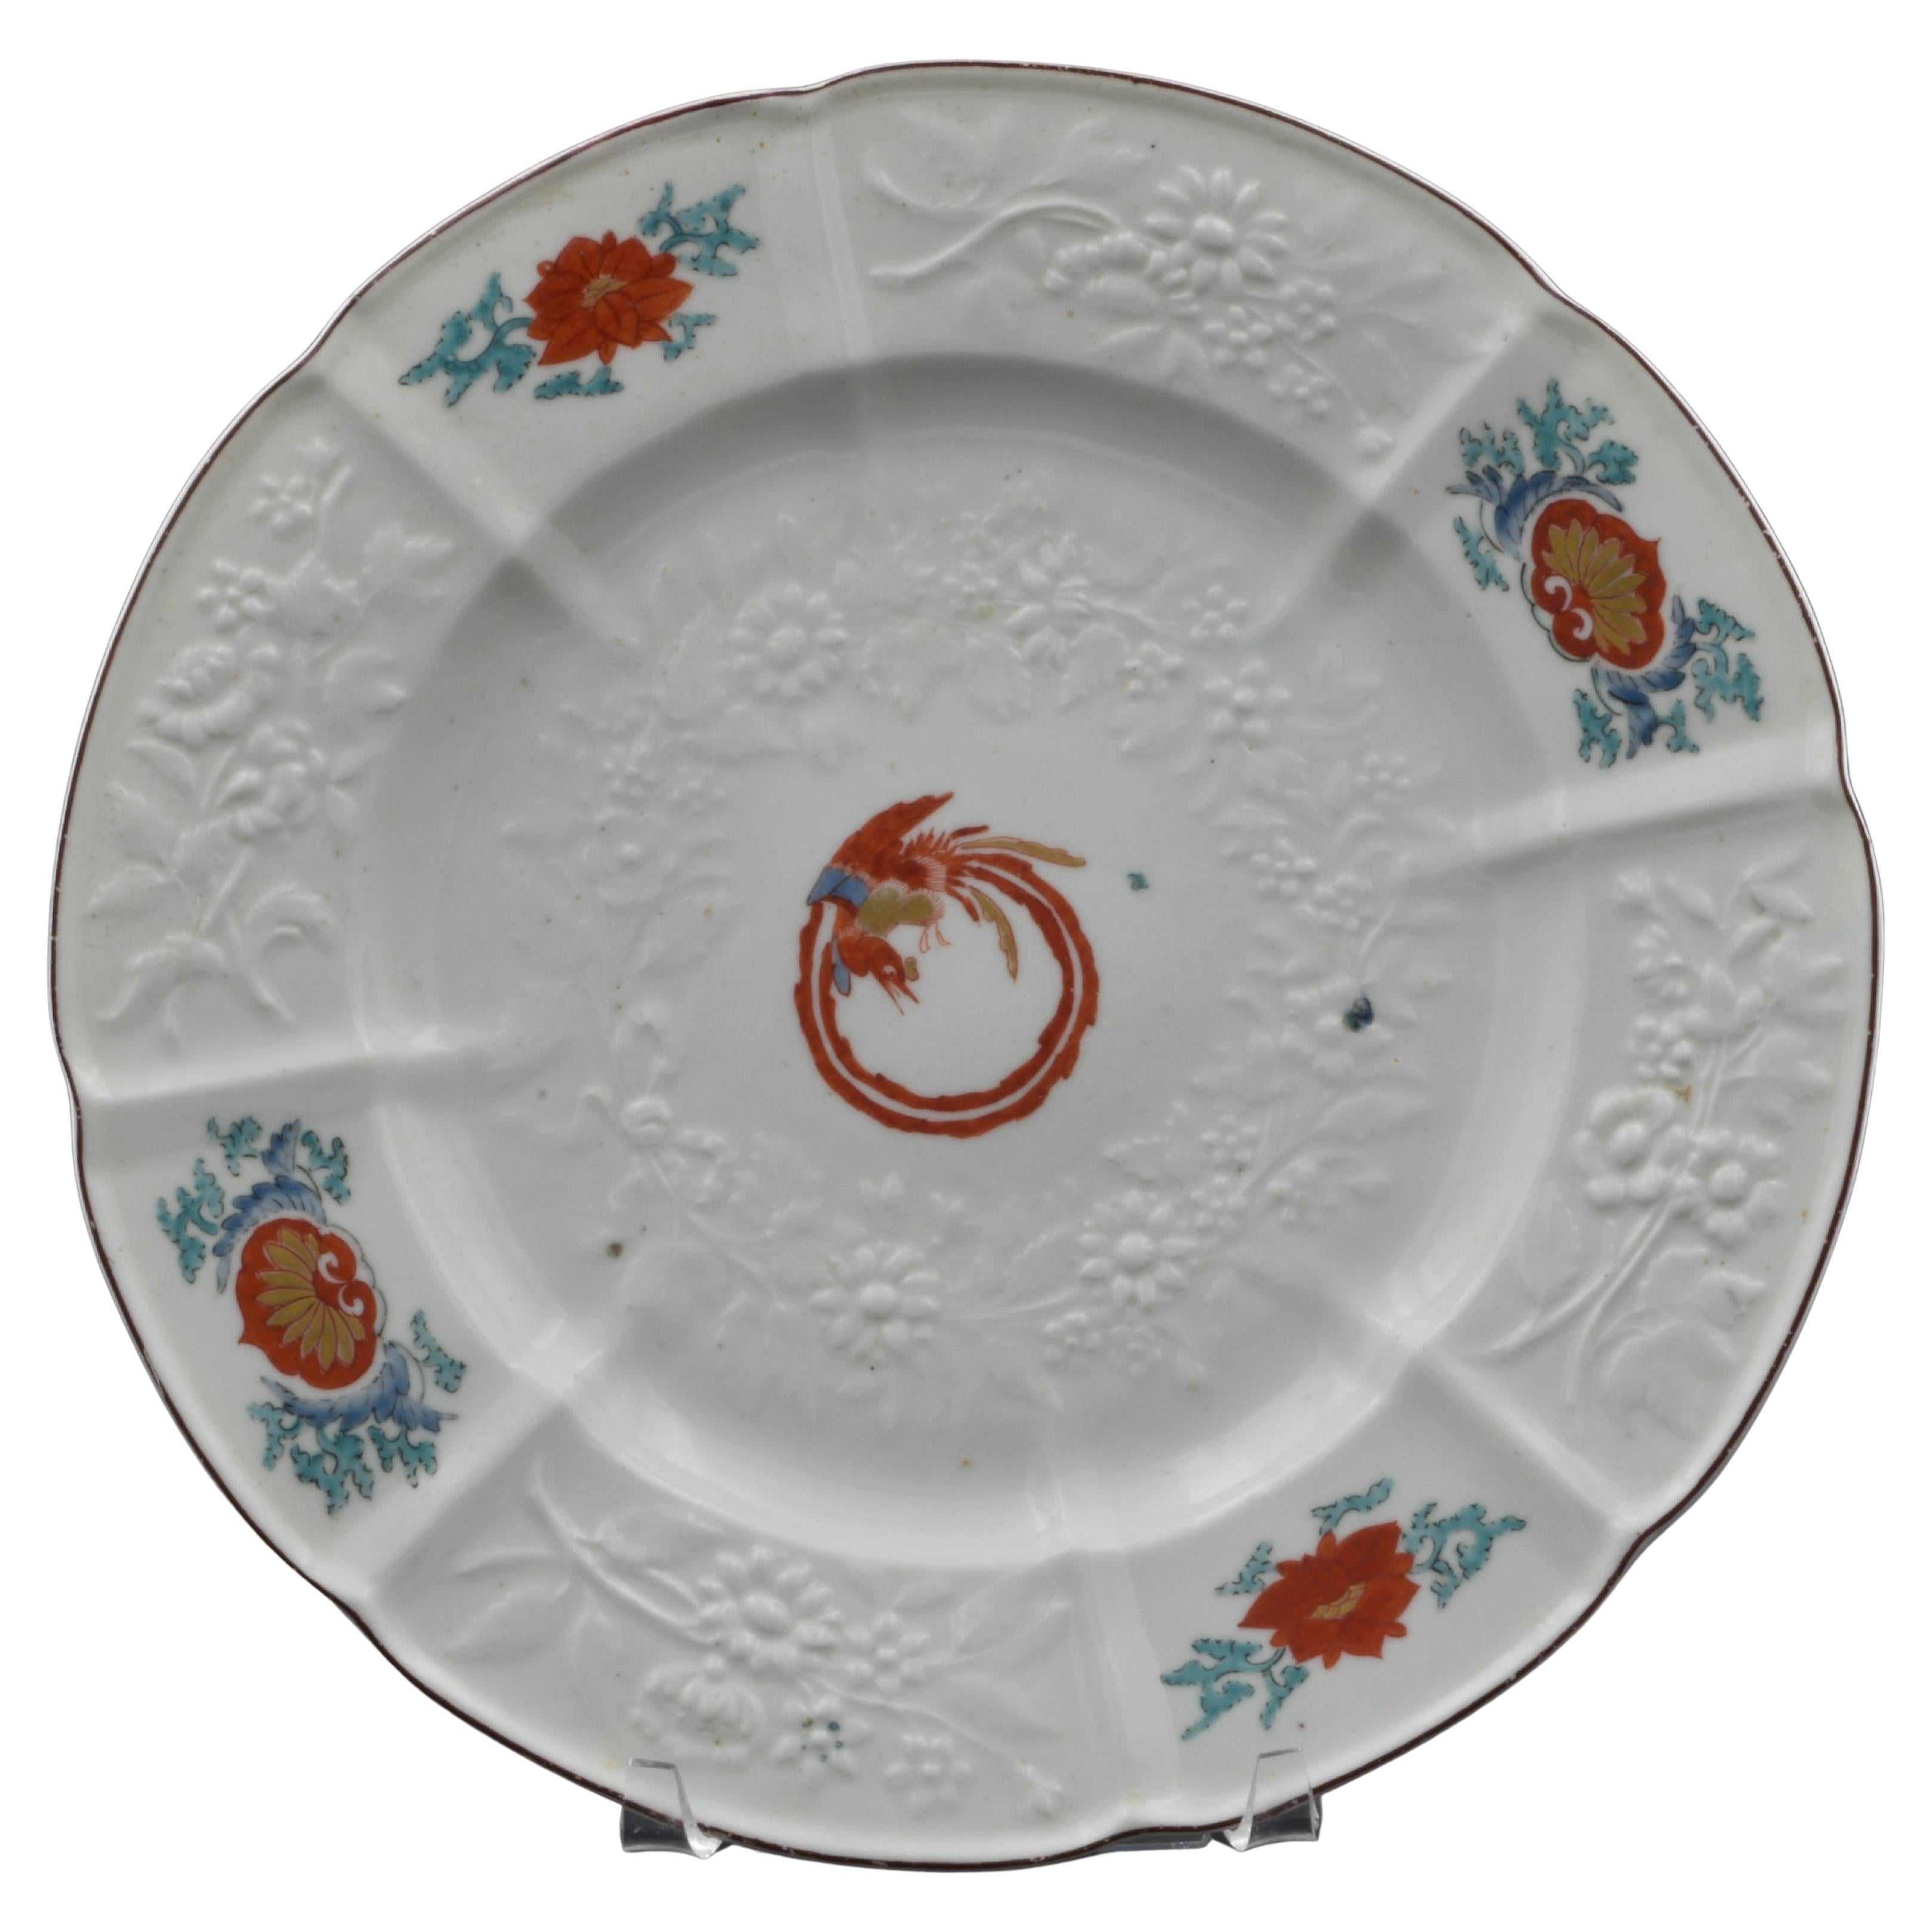 Plate with Coiled Phoenix, Chelsea, C1754